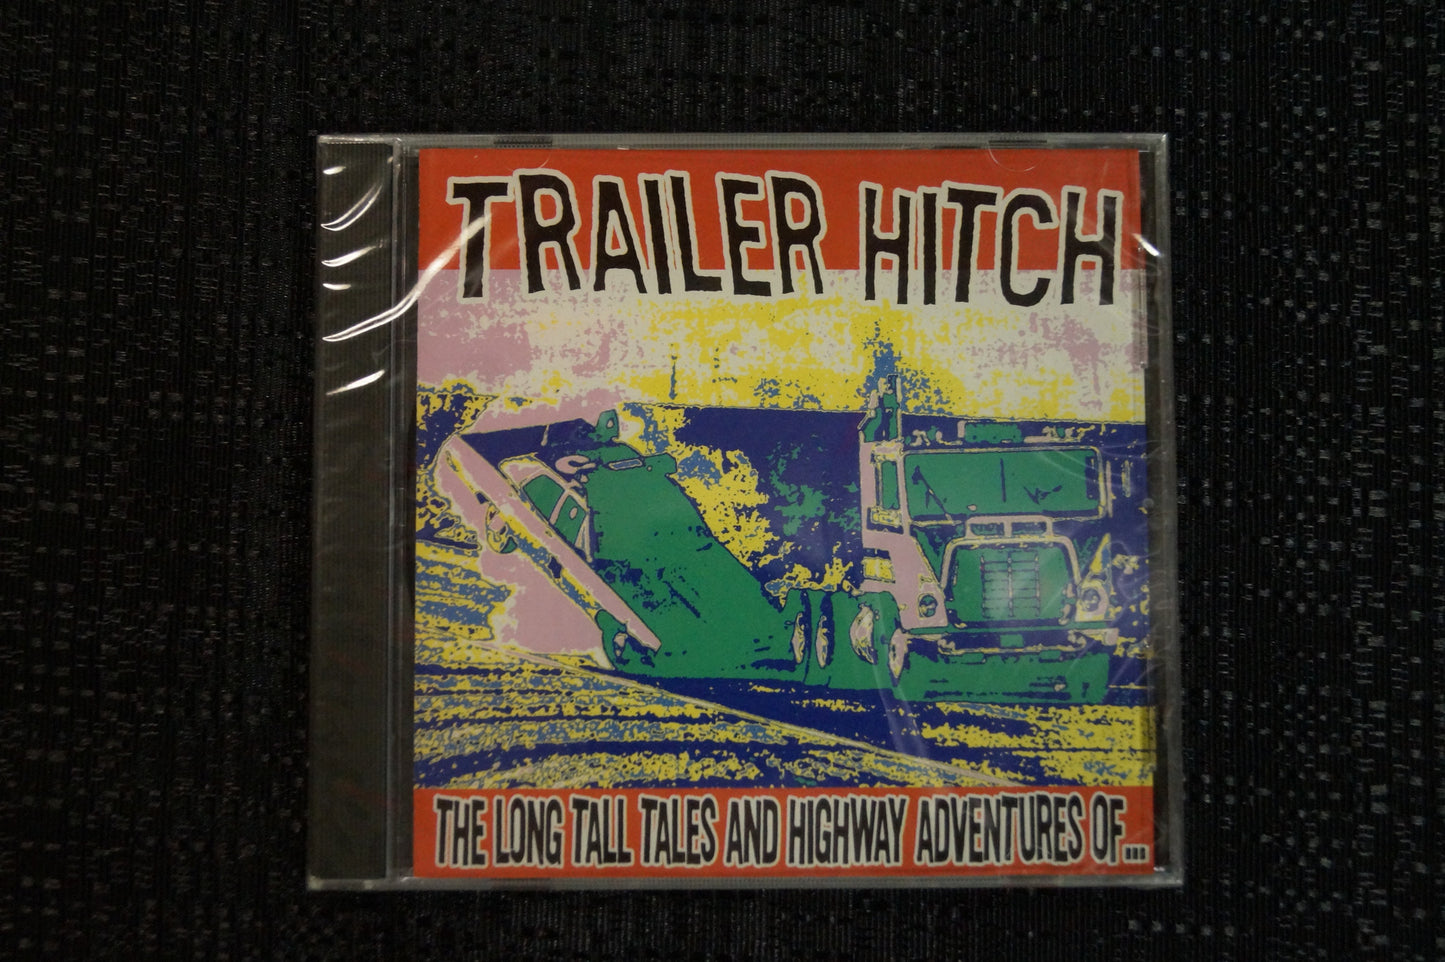 Trailer Hitch "Long Tall Tales and Highway Adventures" 1998 CD Art By Kozik